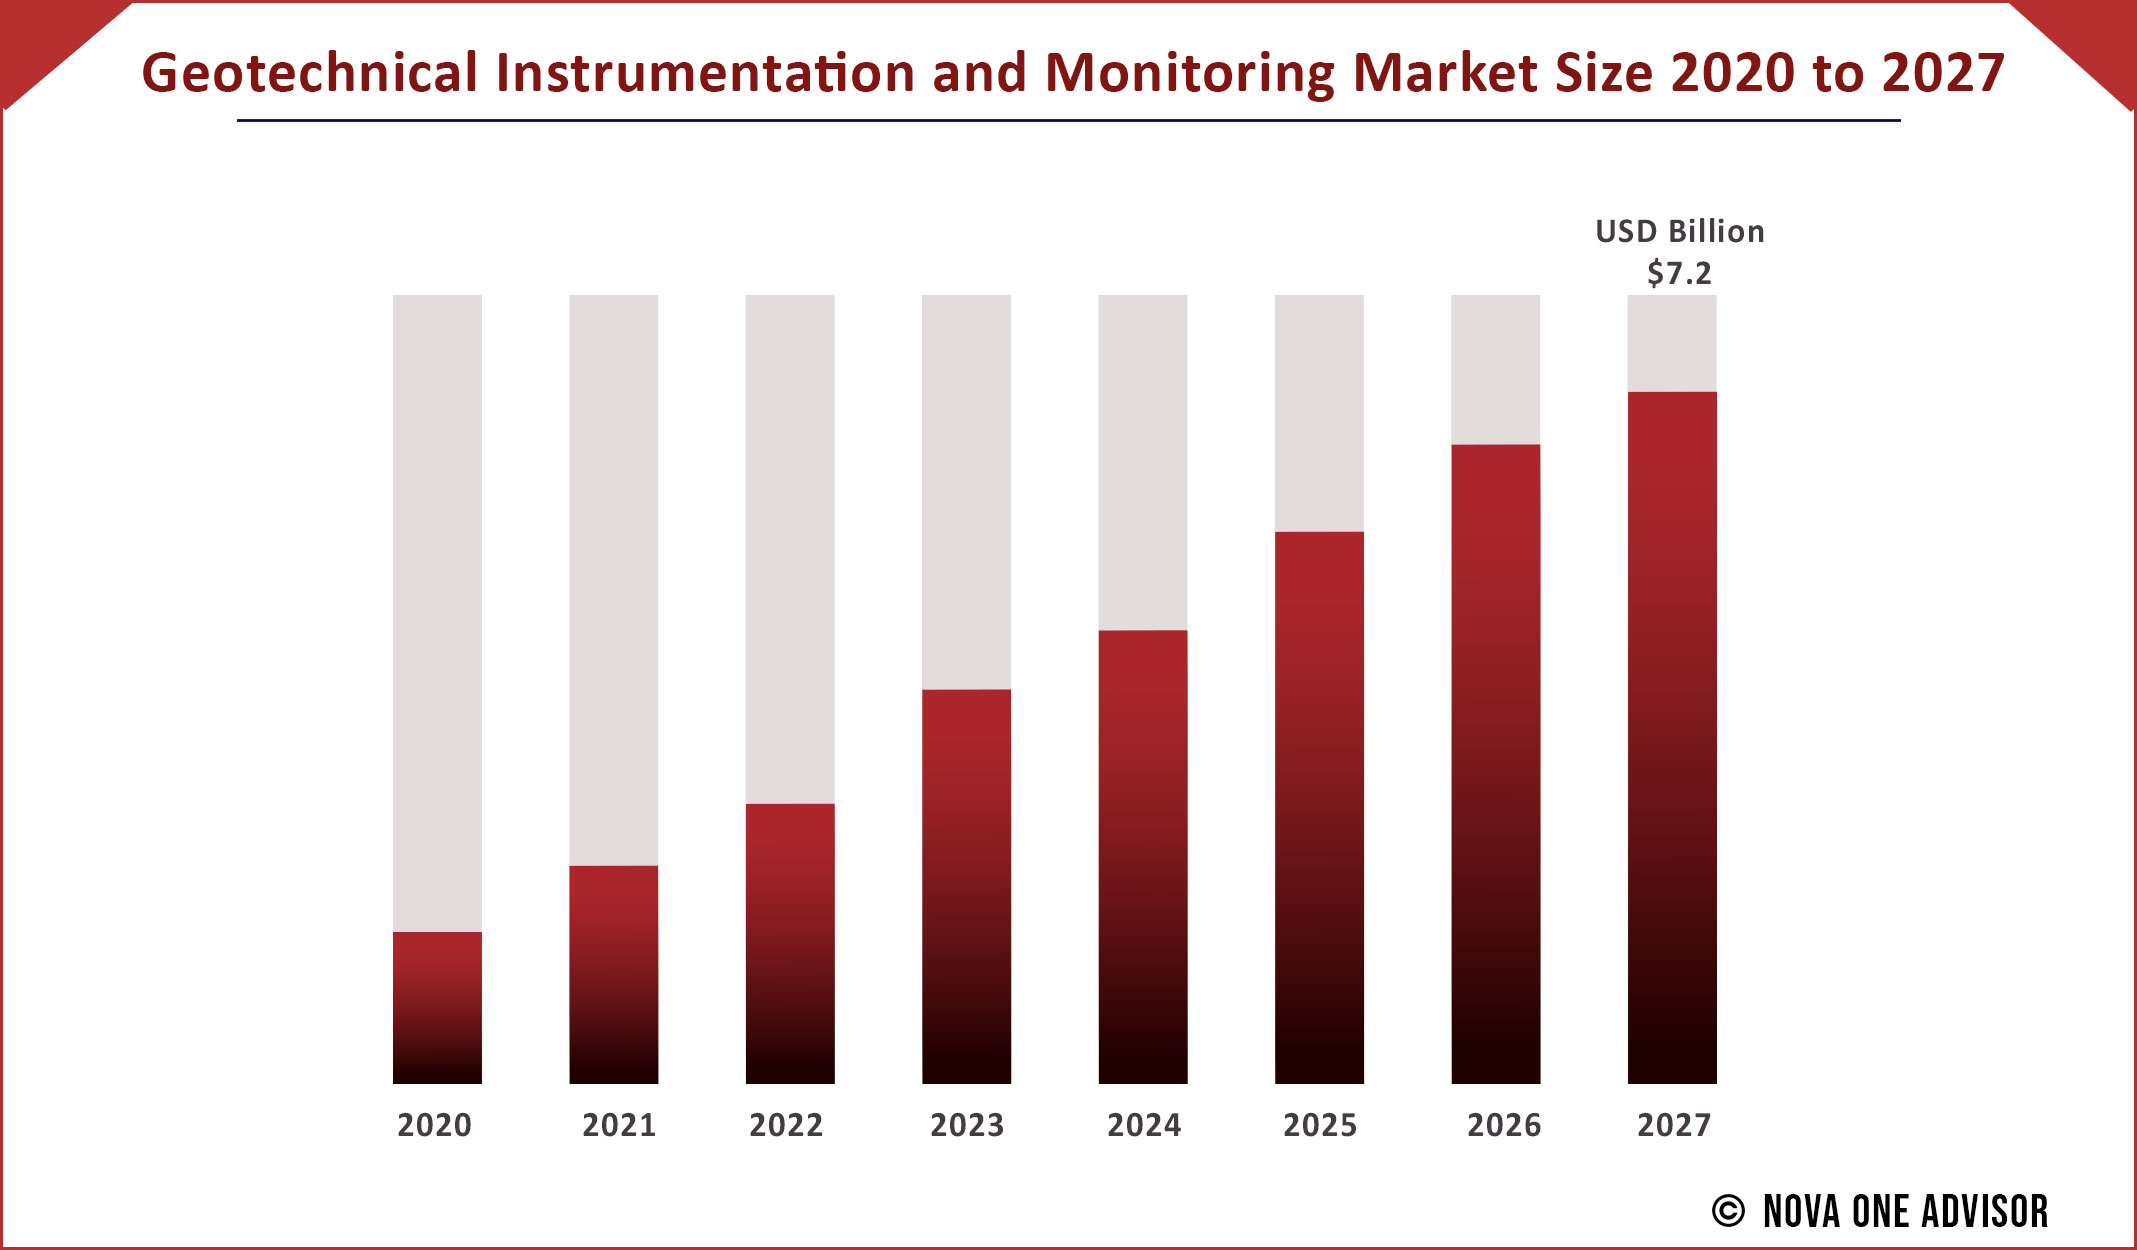 Geotechnical Instrumentation and Monitoring Market Size 2020 to 2027